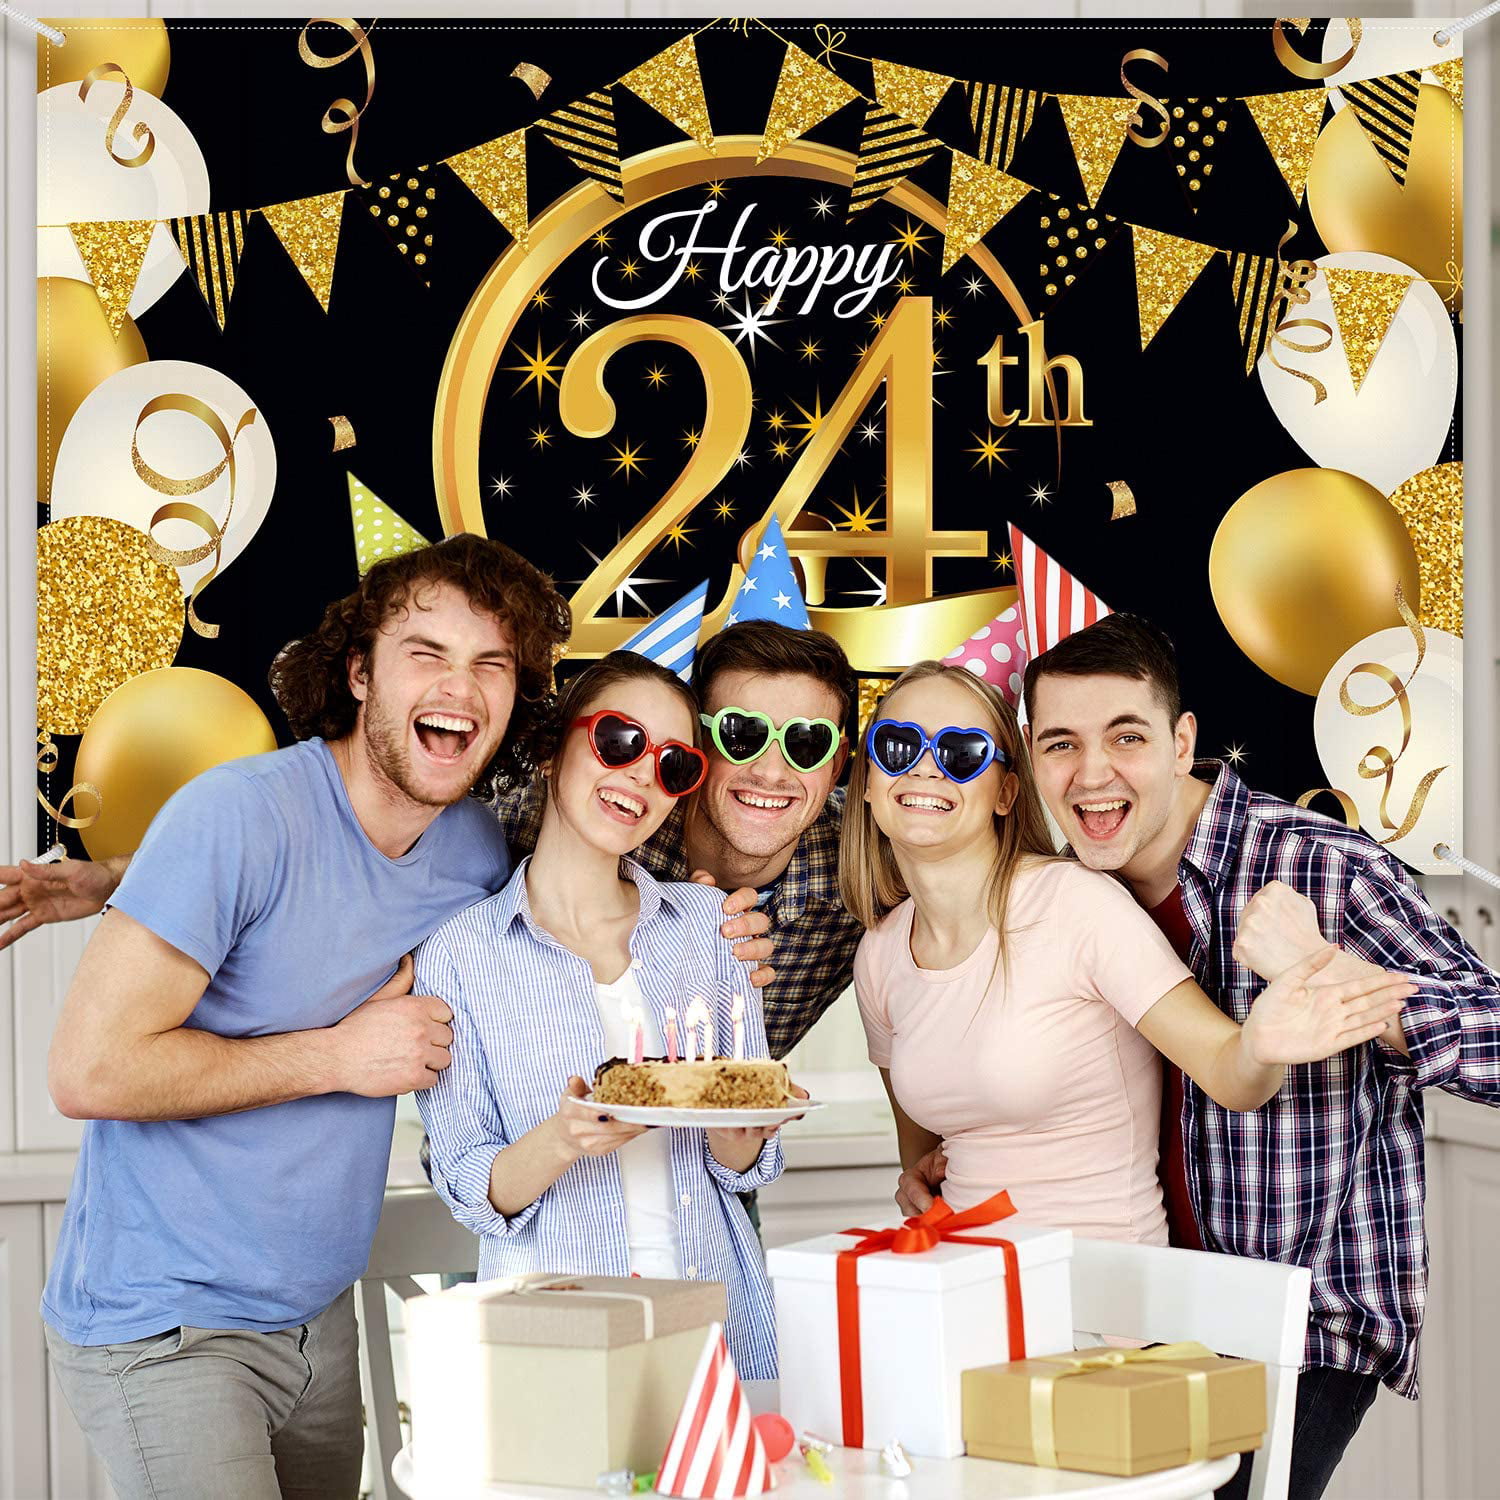 Birthday Party Supplies 59th Birthday Party Decoration Extra Large Fabric Black Gold Sign Poster for Anniversary Photo Booth Backdrop Background Banner 72.8 x 43.3 Inch